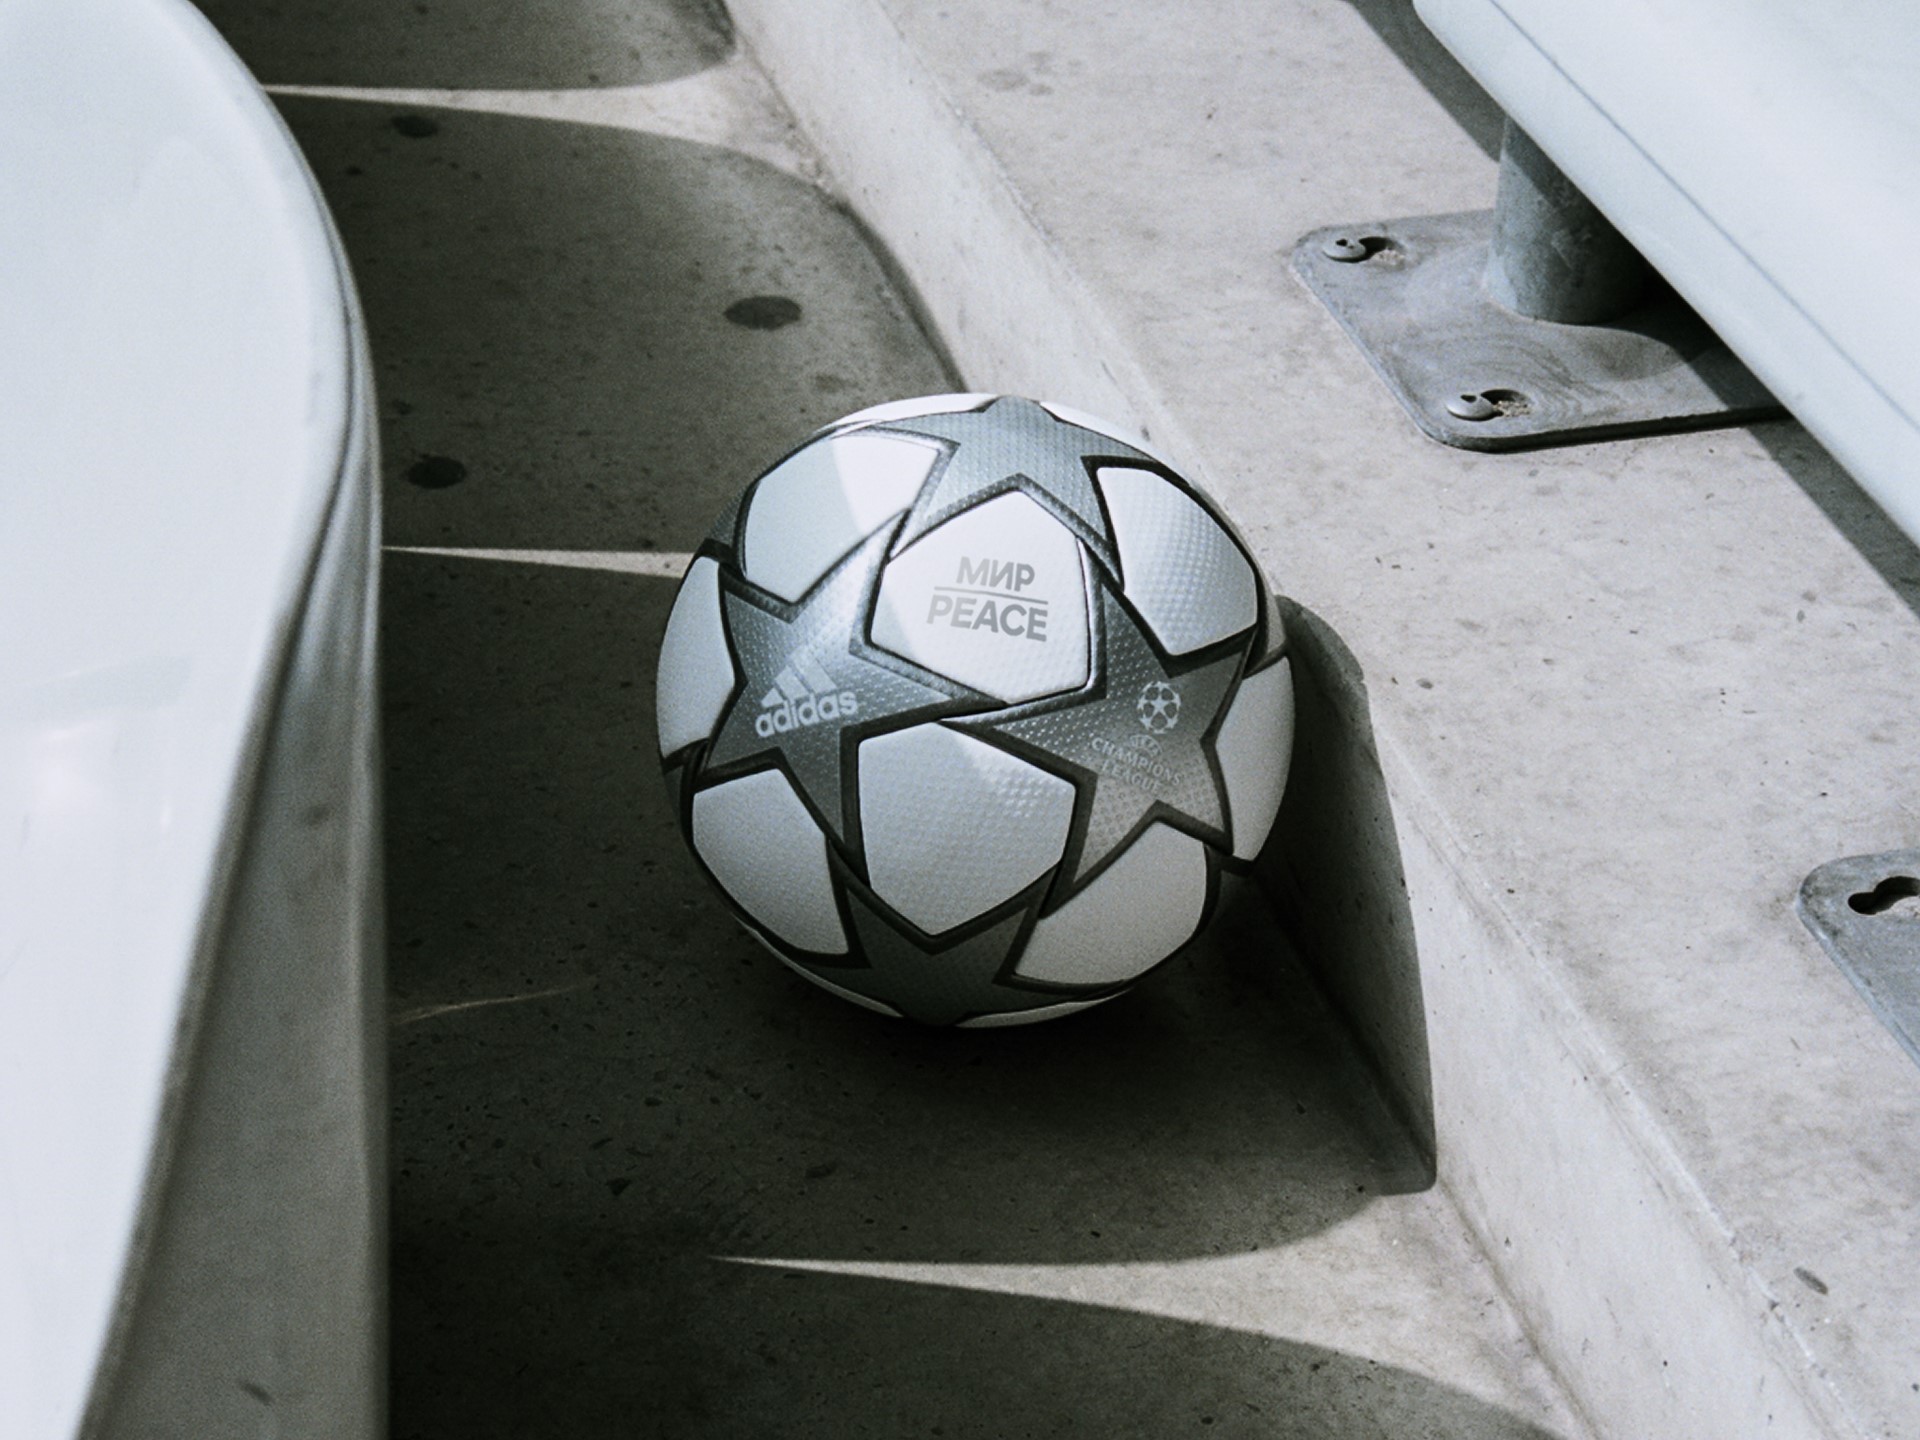 adidas reveals Official Match Ball for UEFA Champions League 2022 final